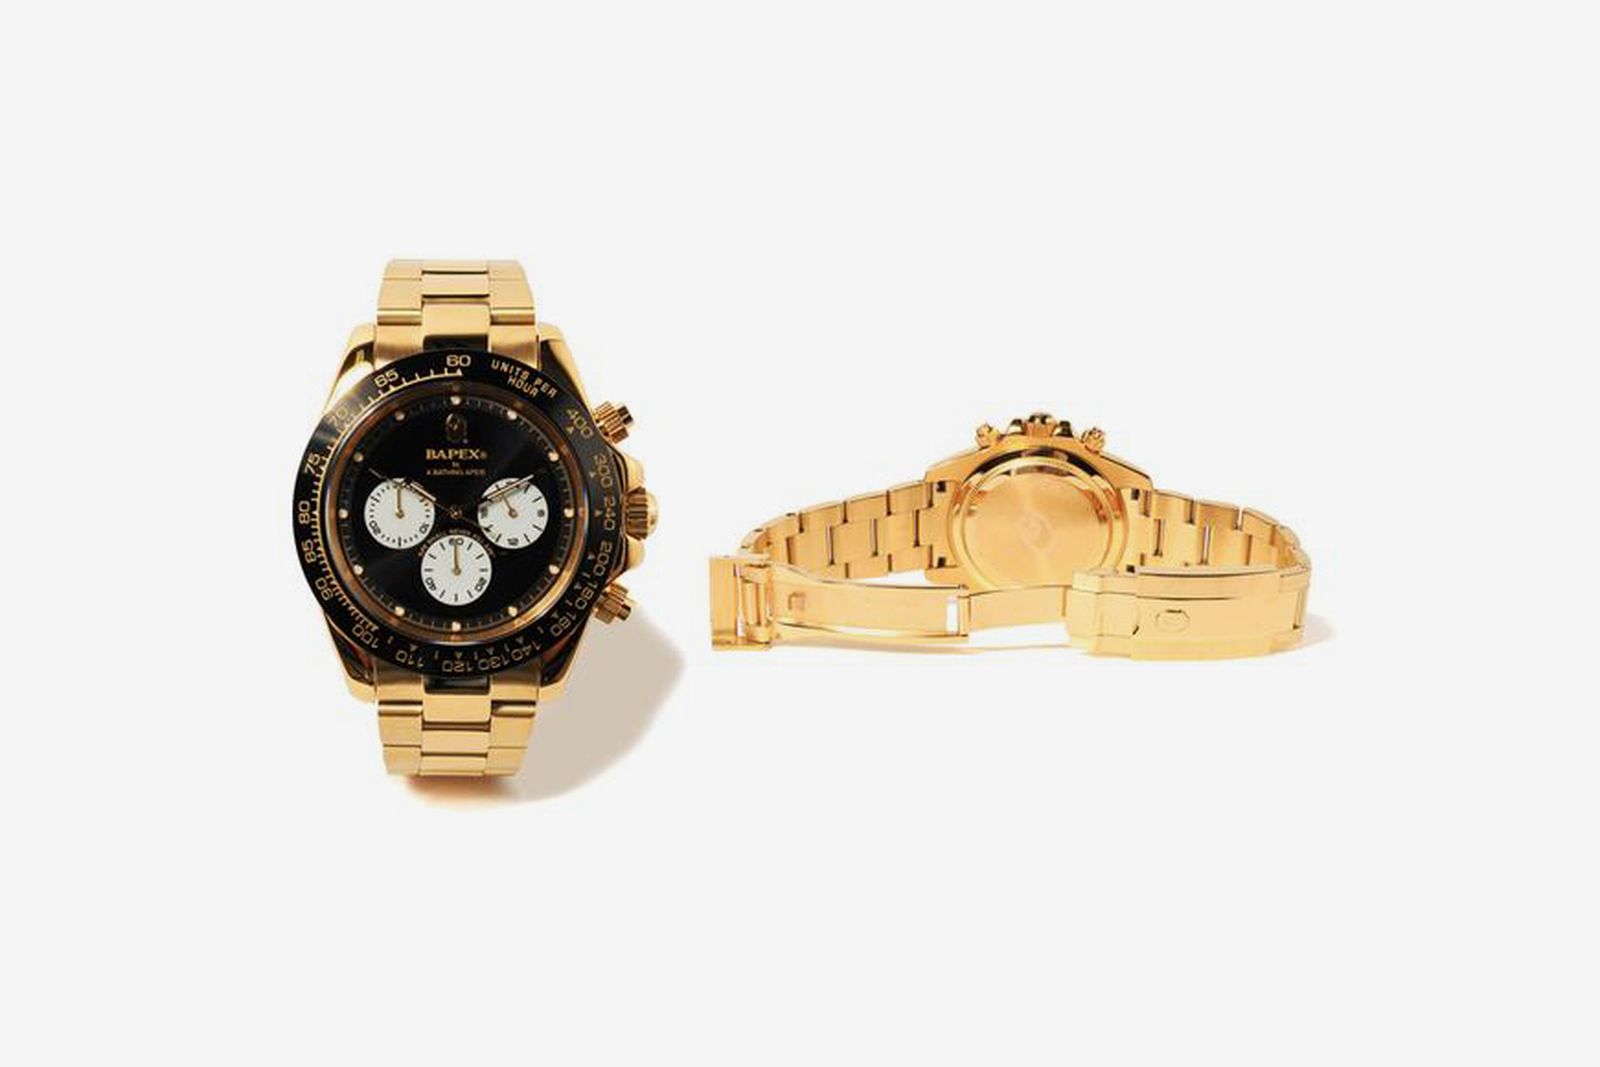 BAPE Is Dropping a Gold Type 4 BAPEX This Week